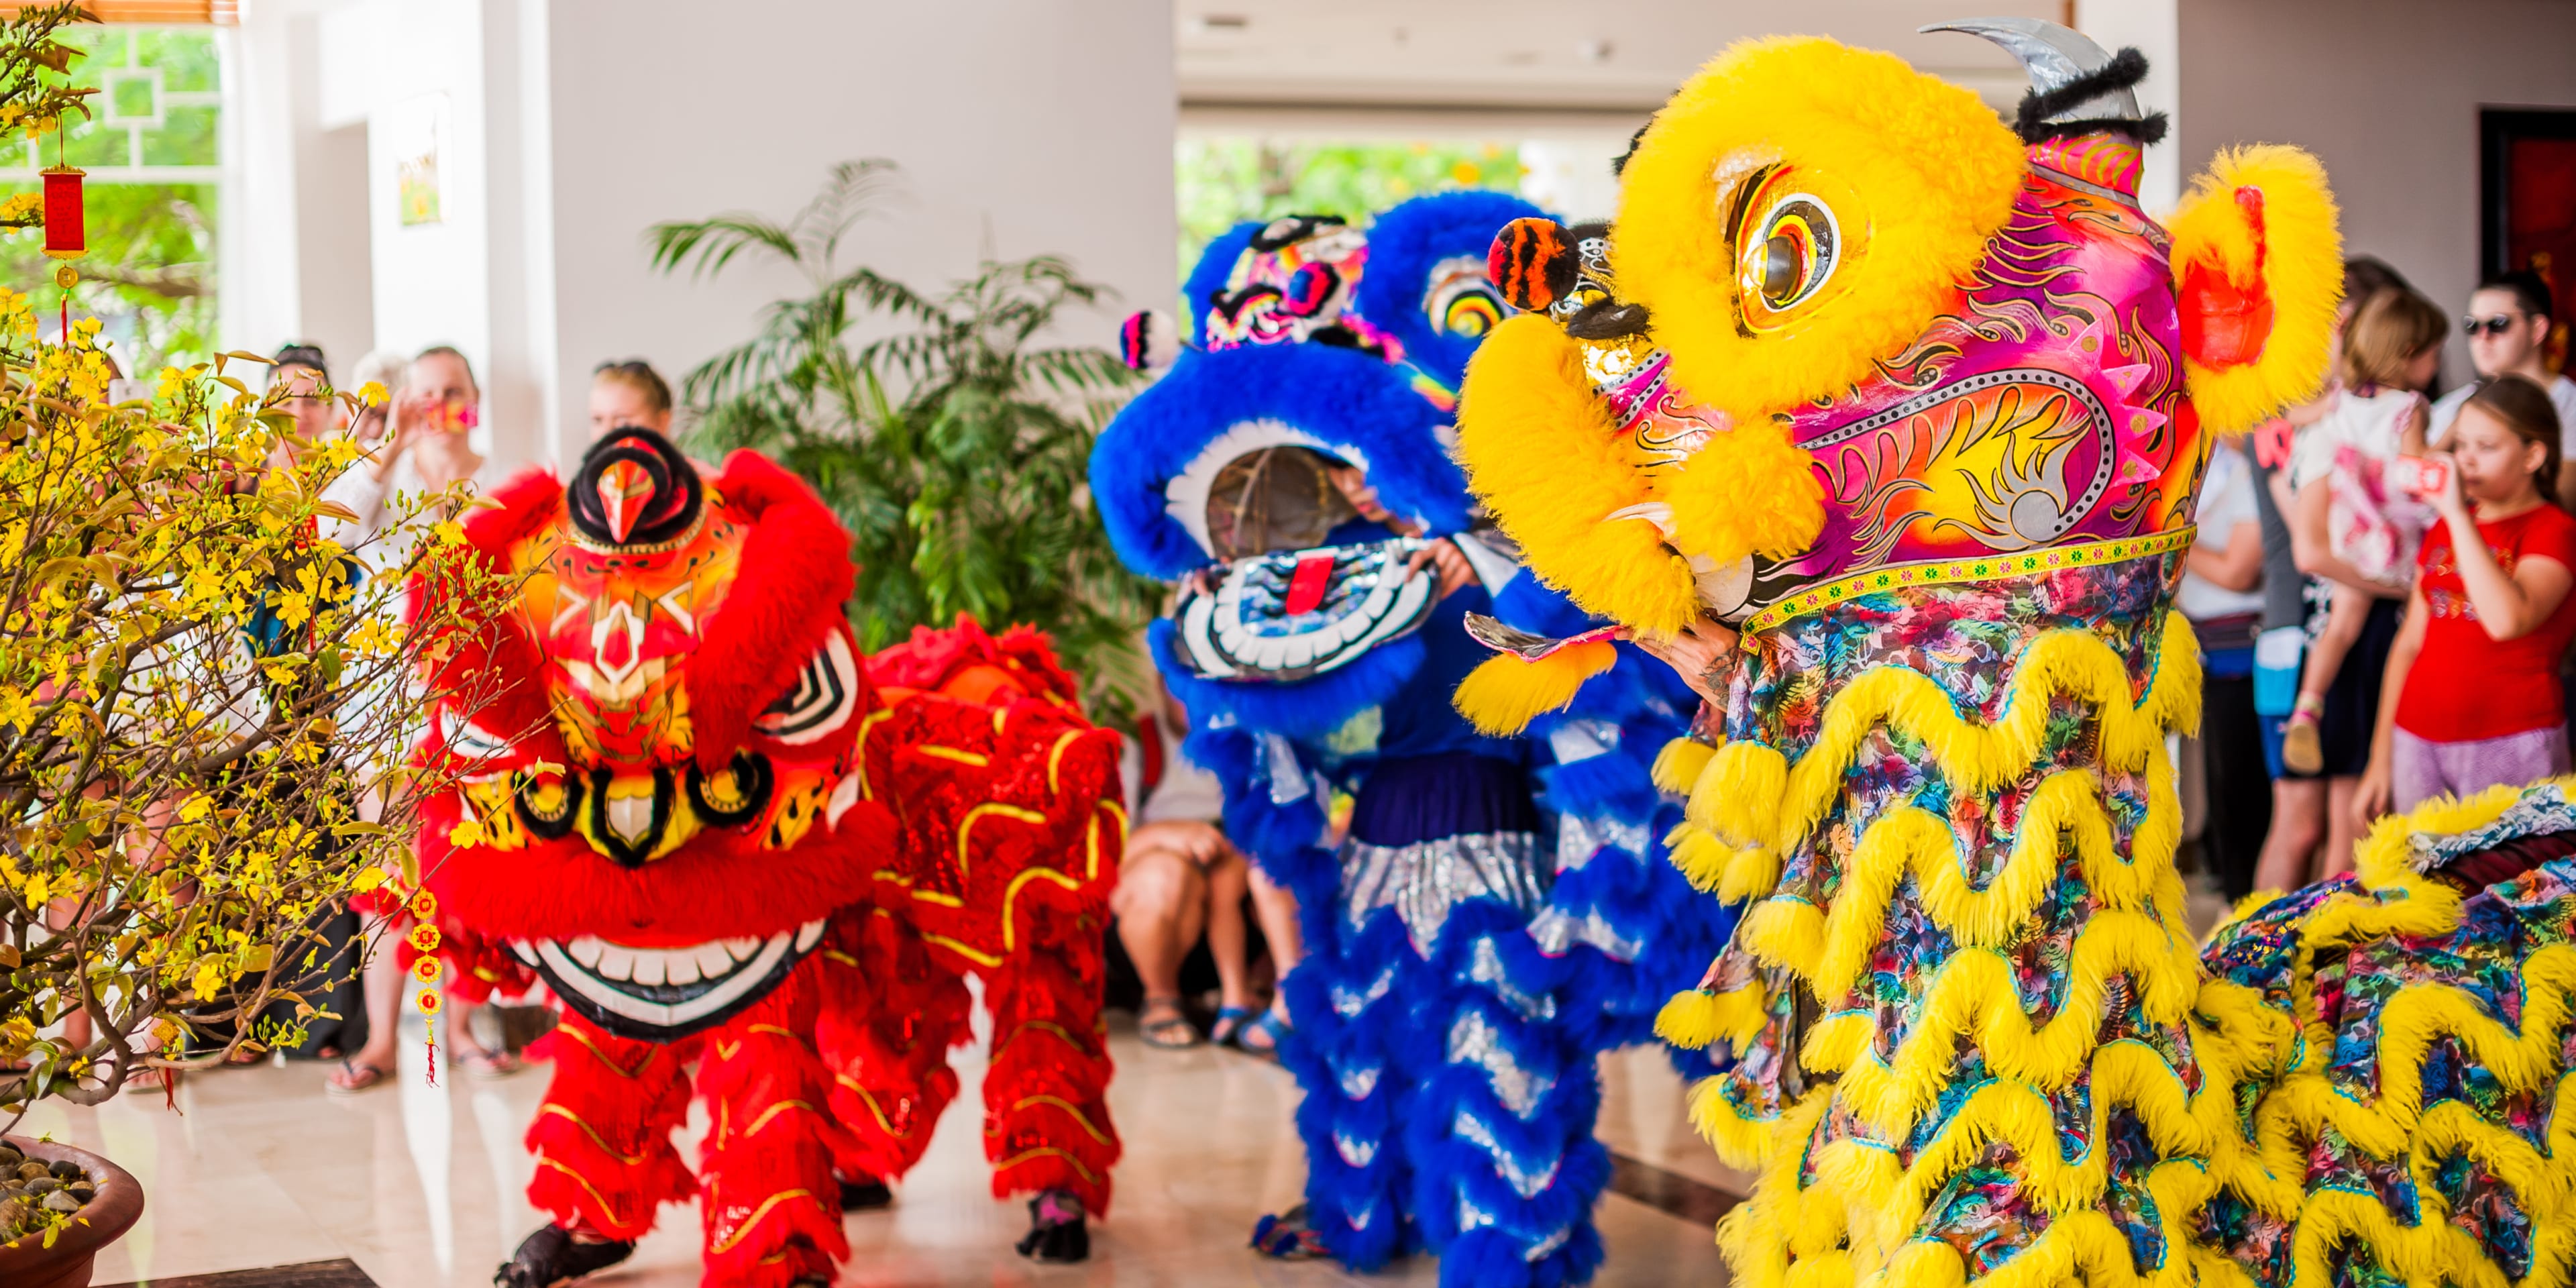 Three lion dances with a red, blue and yellow lion lined up from left to right.